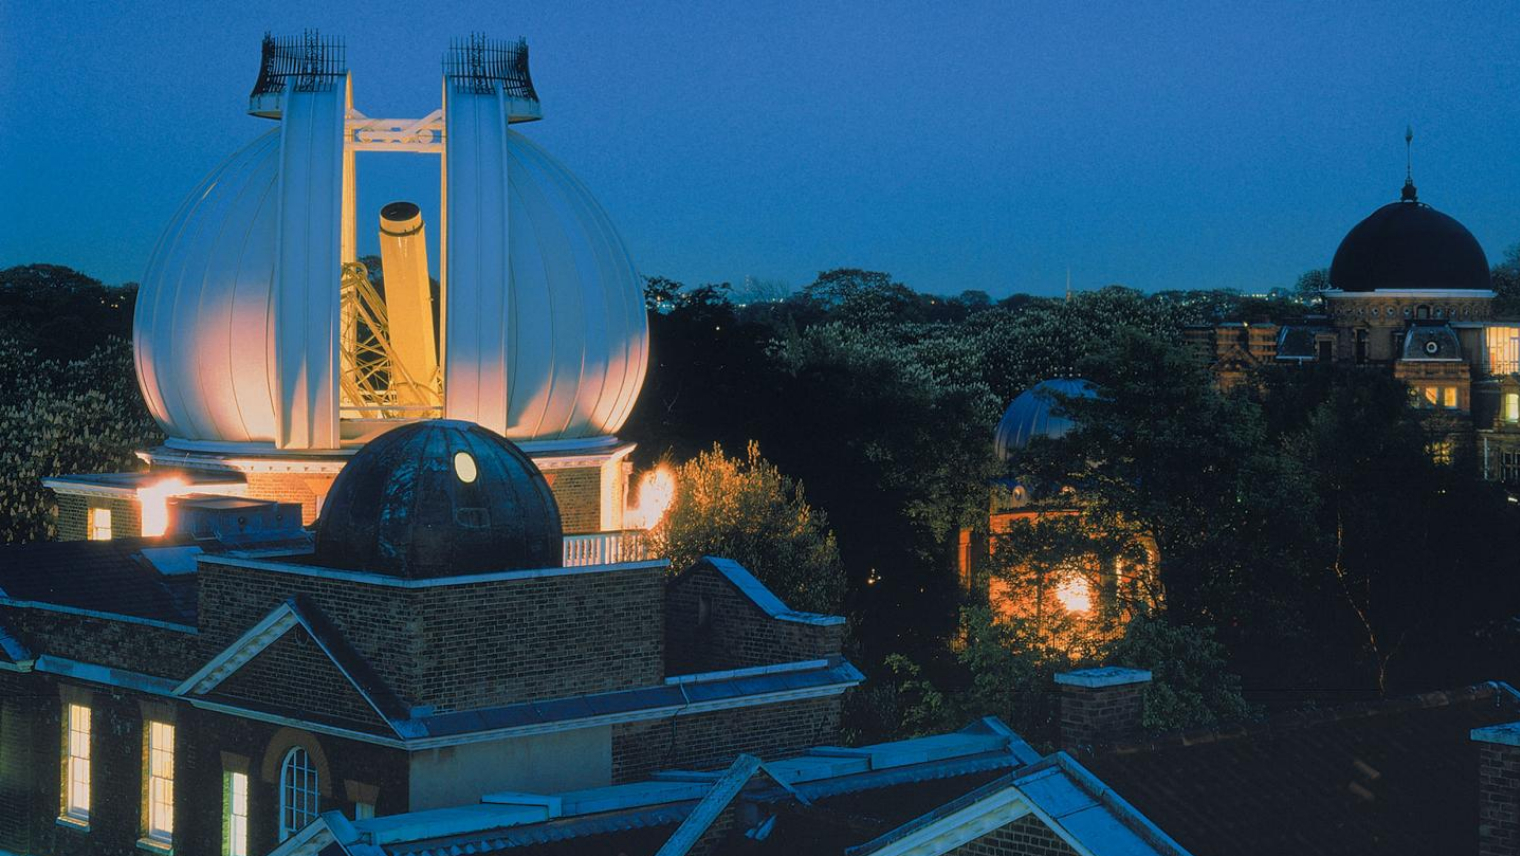 The Royal Observatory at night